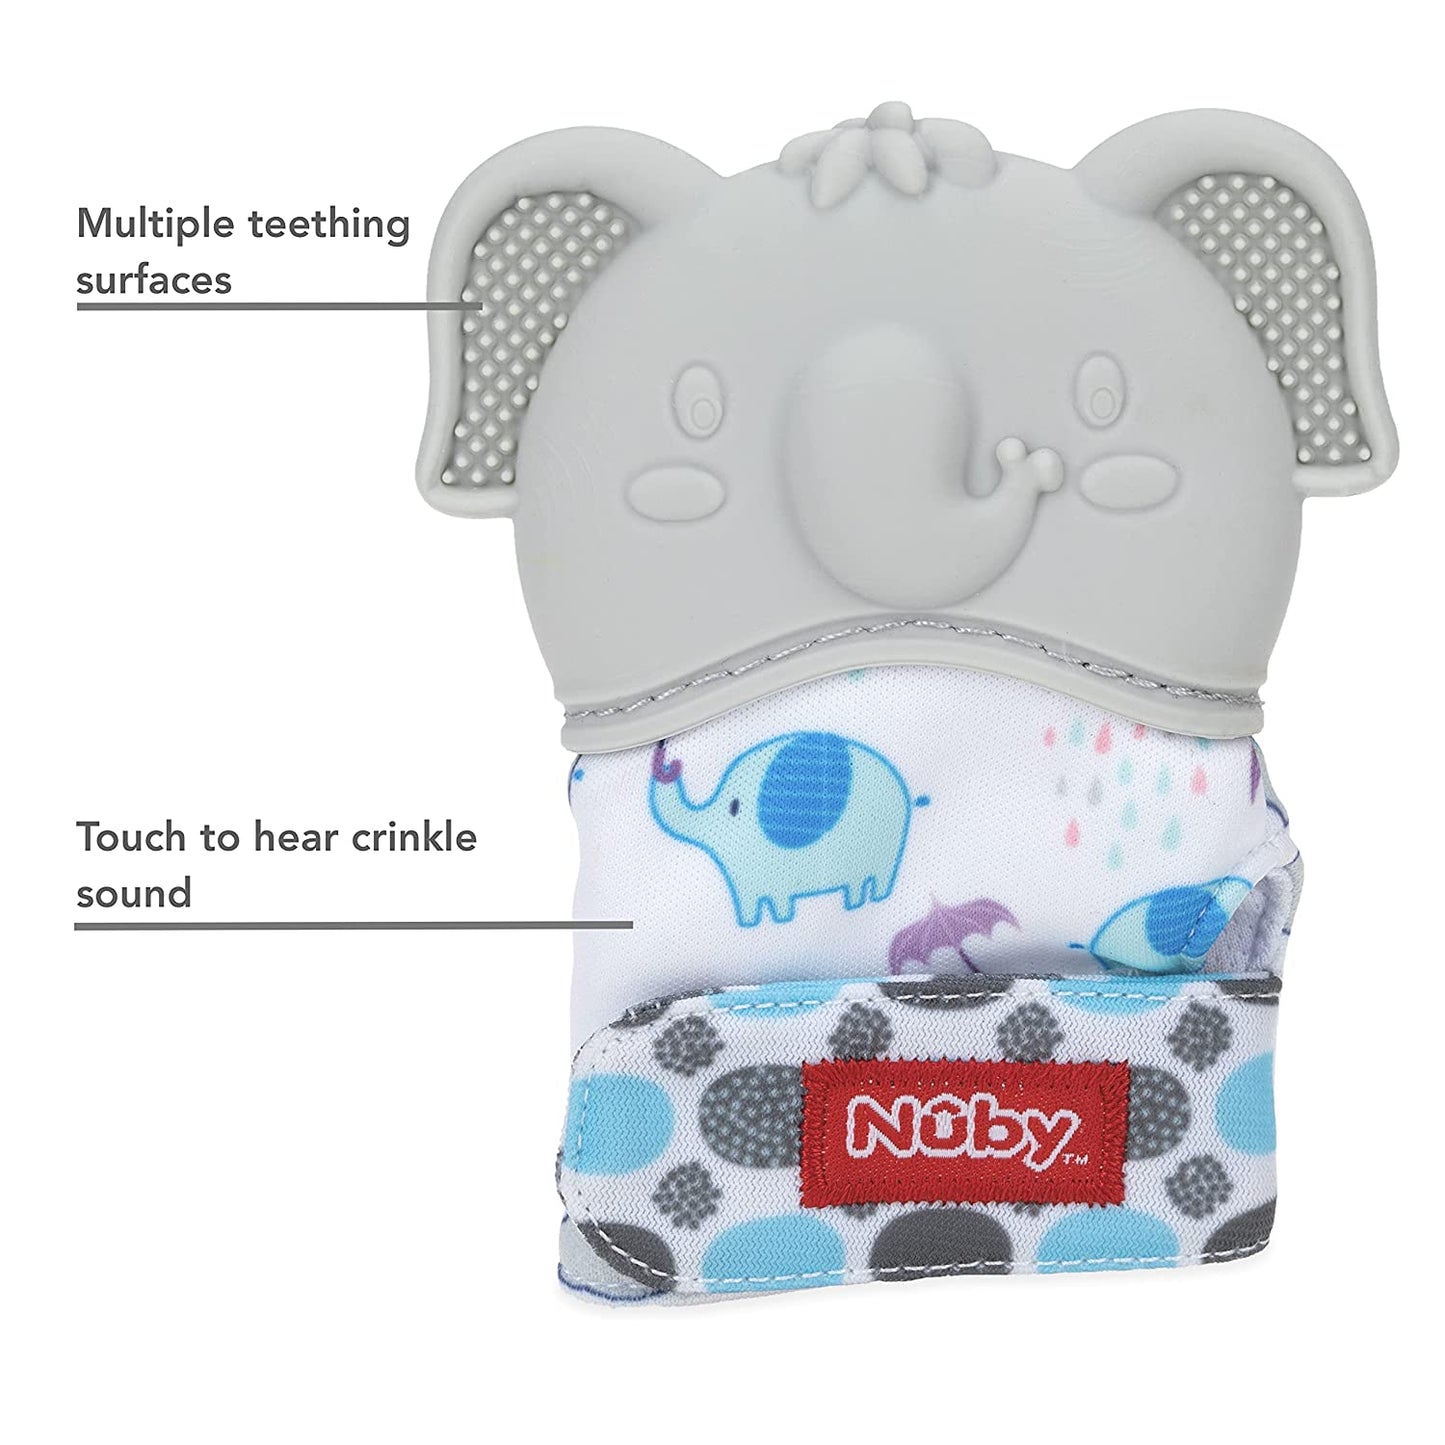 Nuby Happy Hands Silicone Teething Mitten: 3M+, Elephant, Gray (80729)